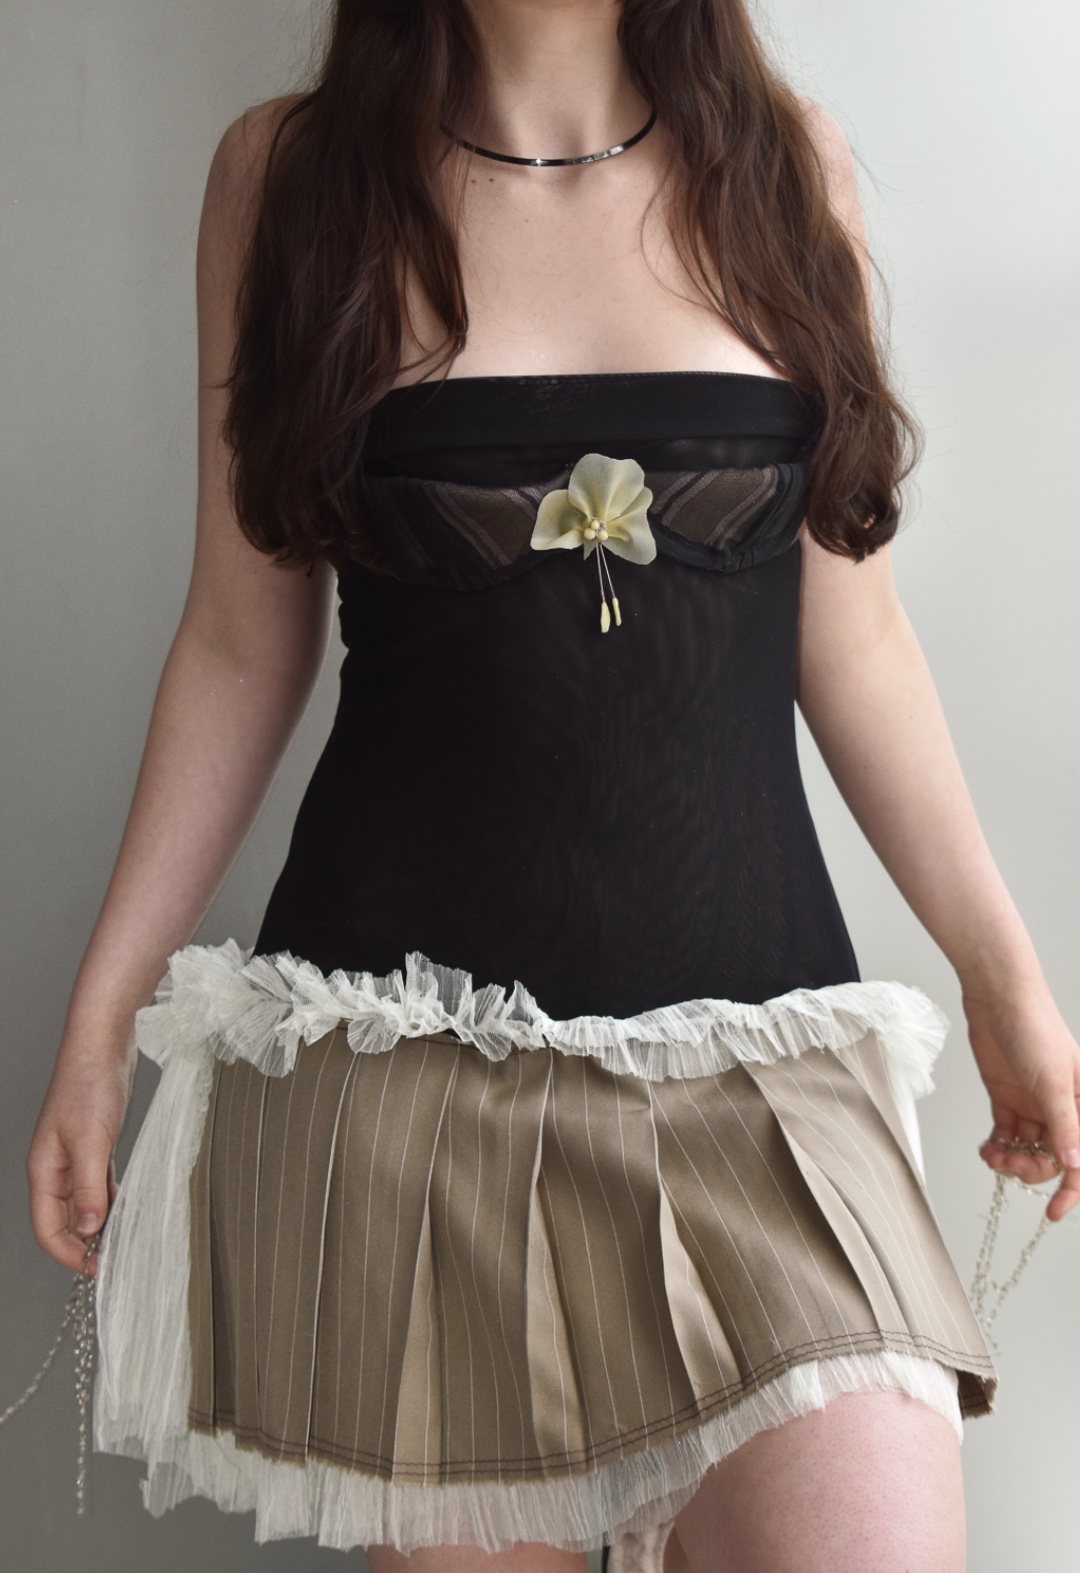 A detail image of the dress, featuring a muted striped bustier, latex flower, and pinstriped pleats.